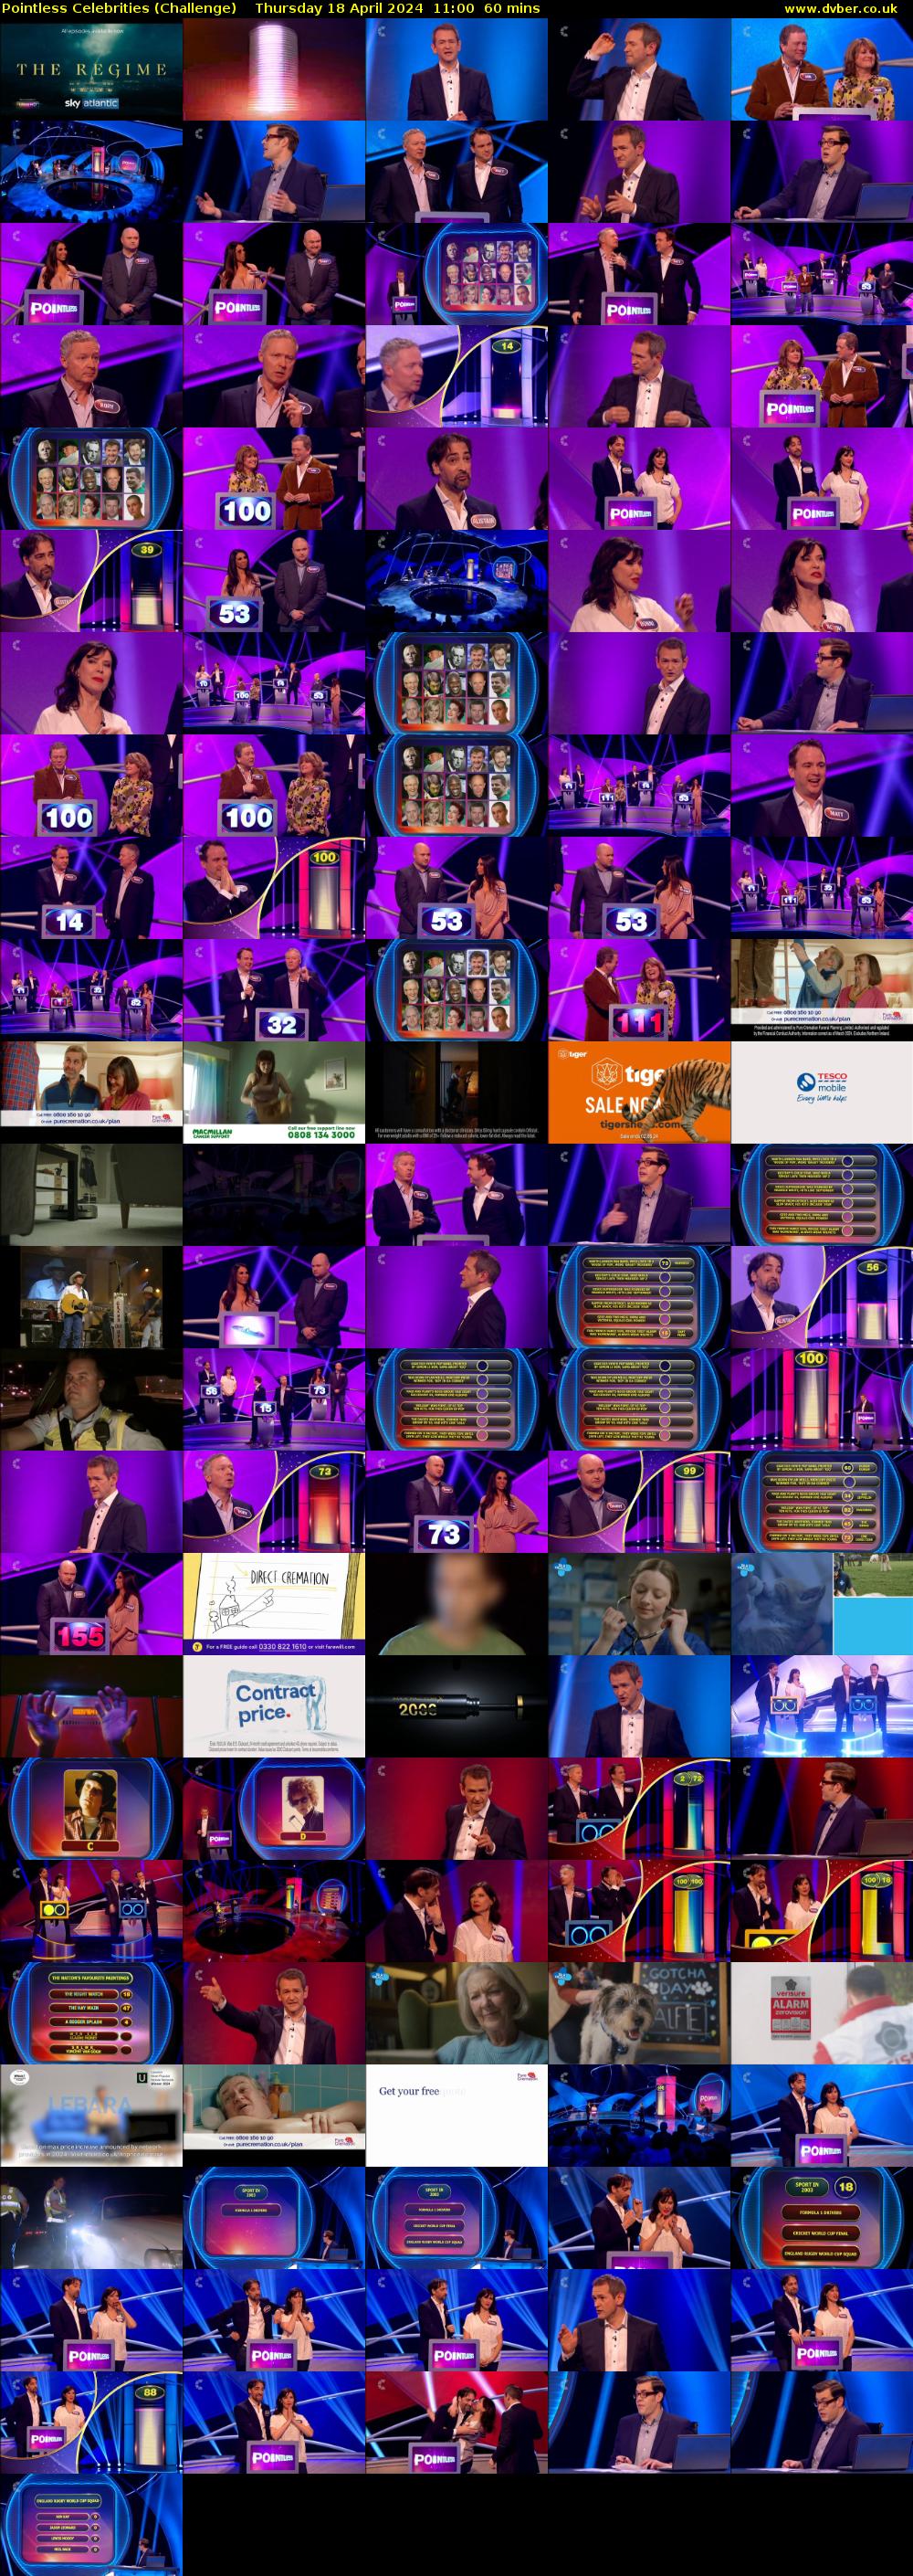 Pointless Celebrities (Challenge) Thursday 18 April 2024 11:00 - 12:00